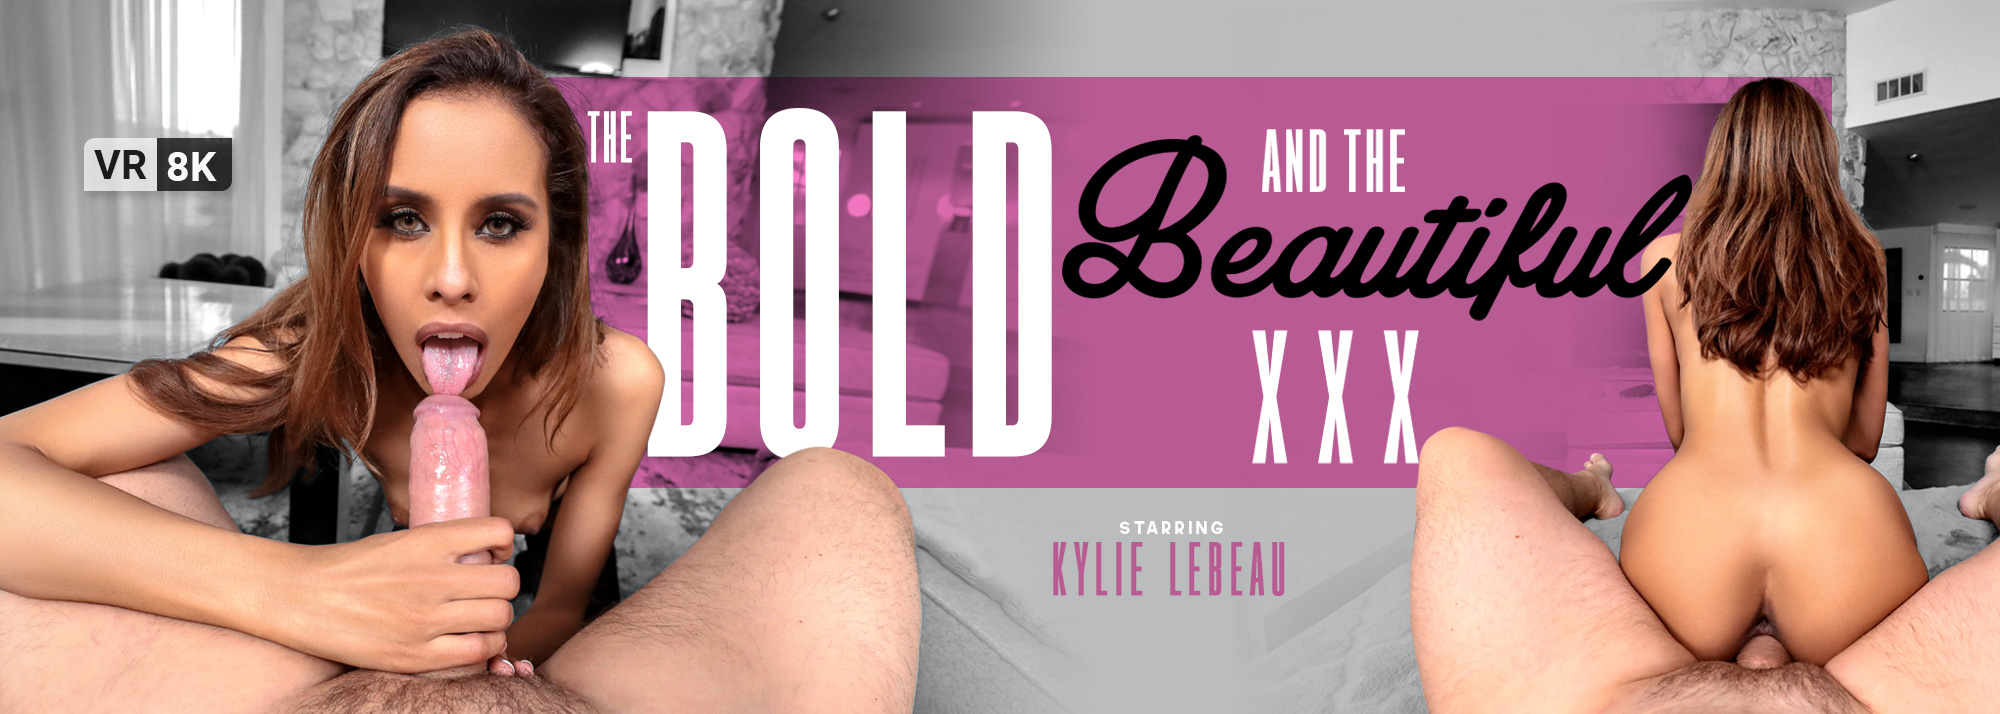 The Bold and The Beautiful XXX with Kylie Le Beau  Slideshow